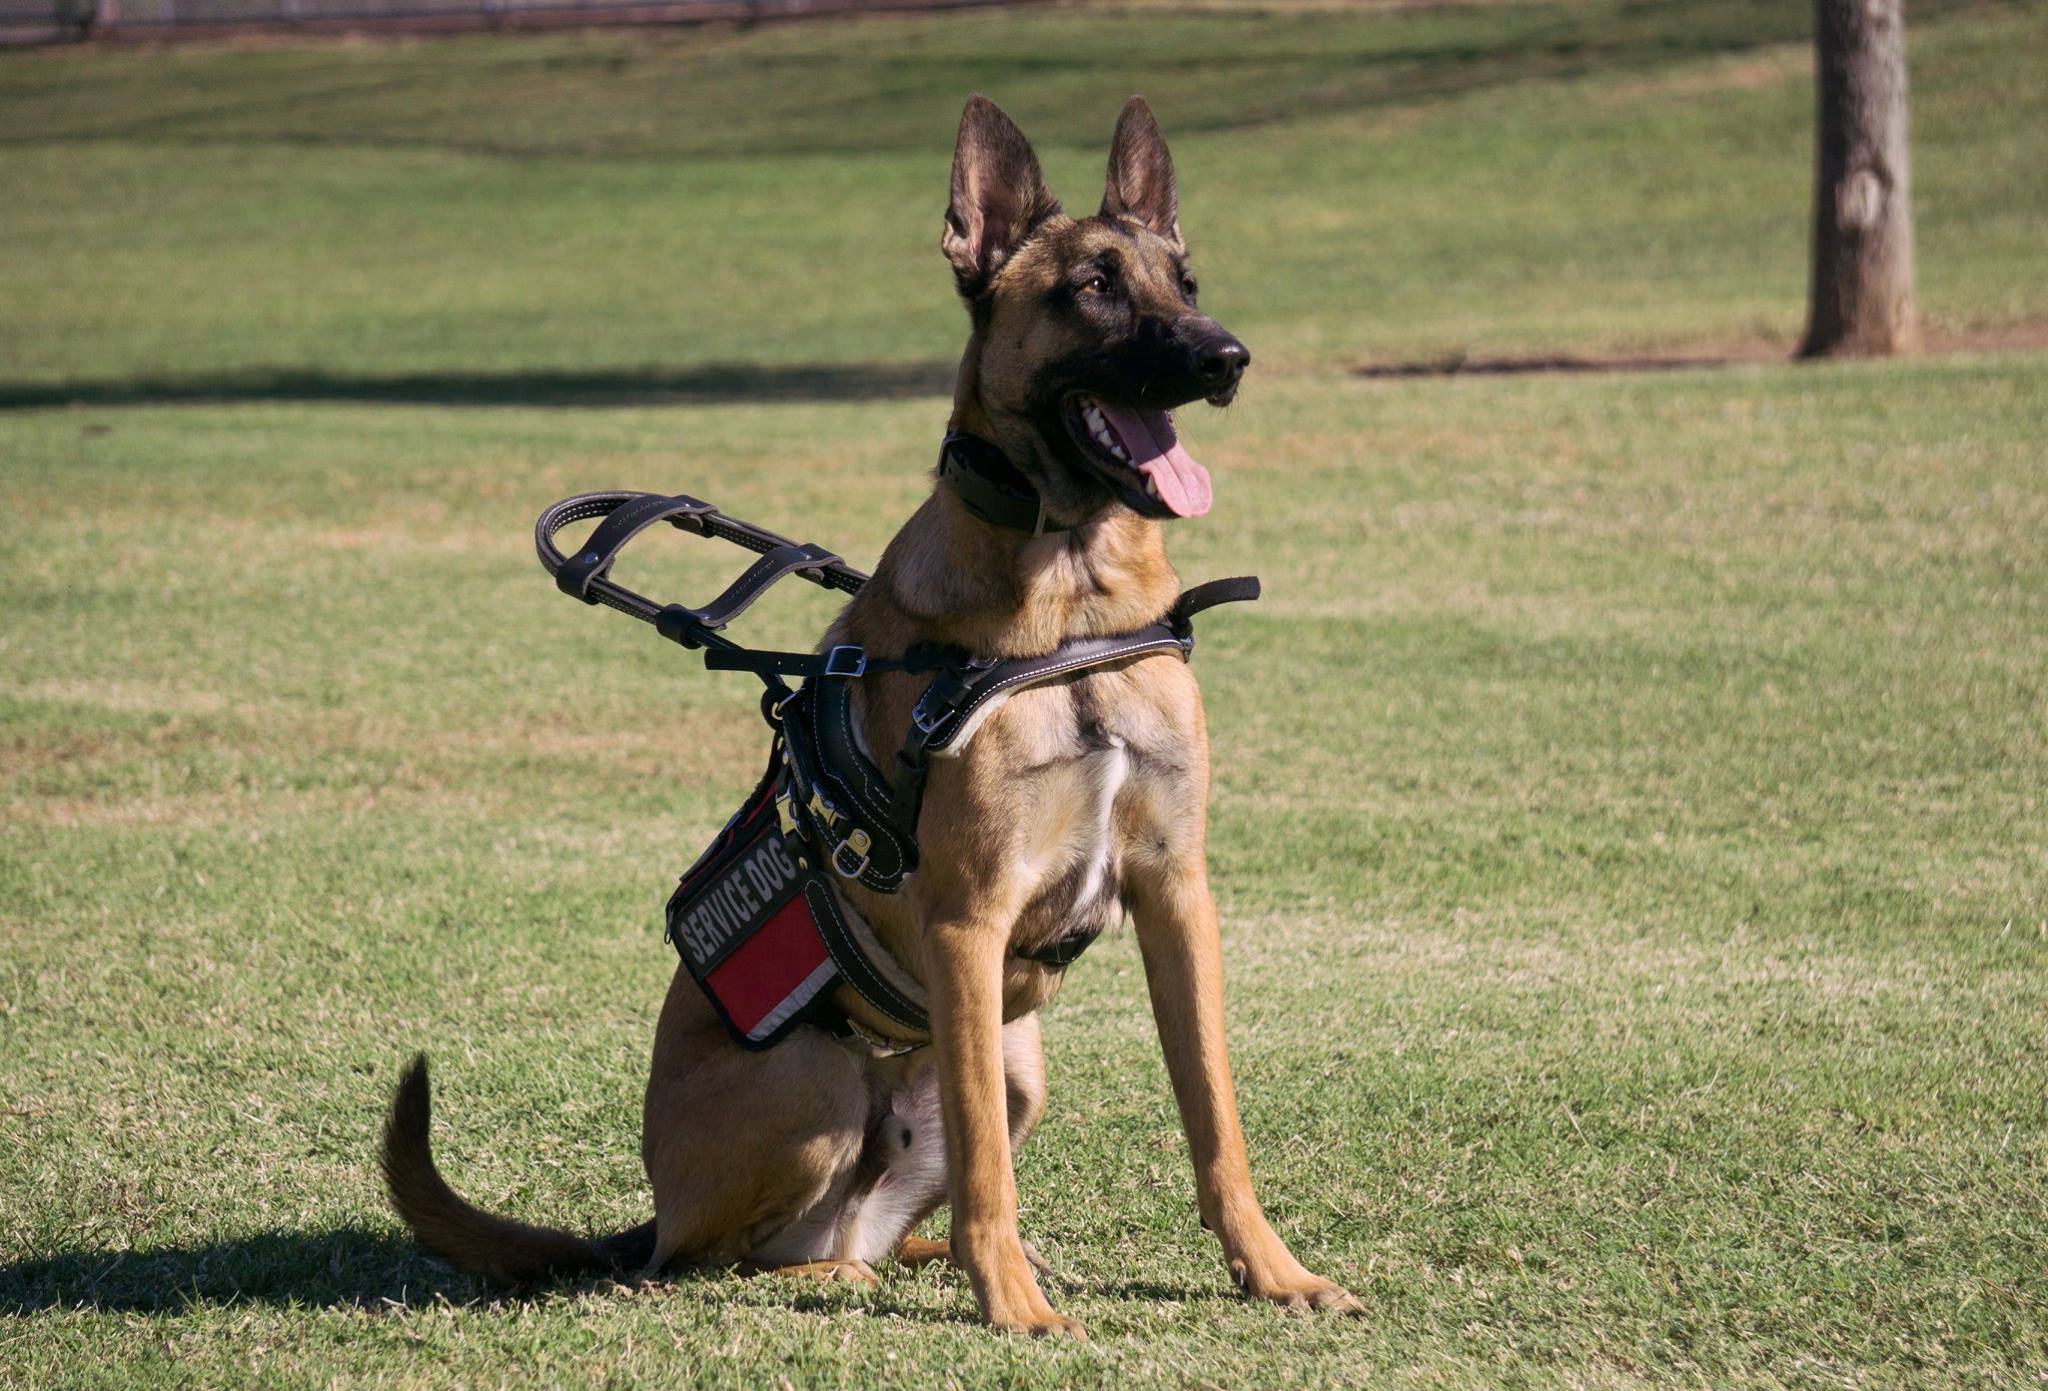 Spending Your Summer with a Service Dog in Fort Worth